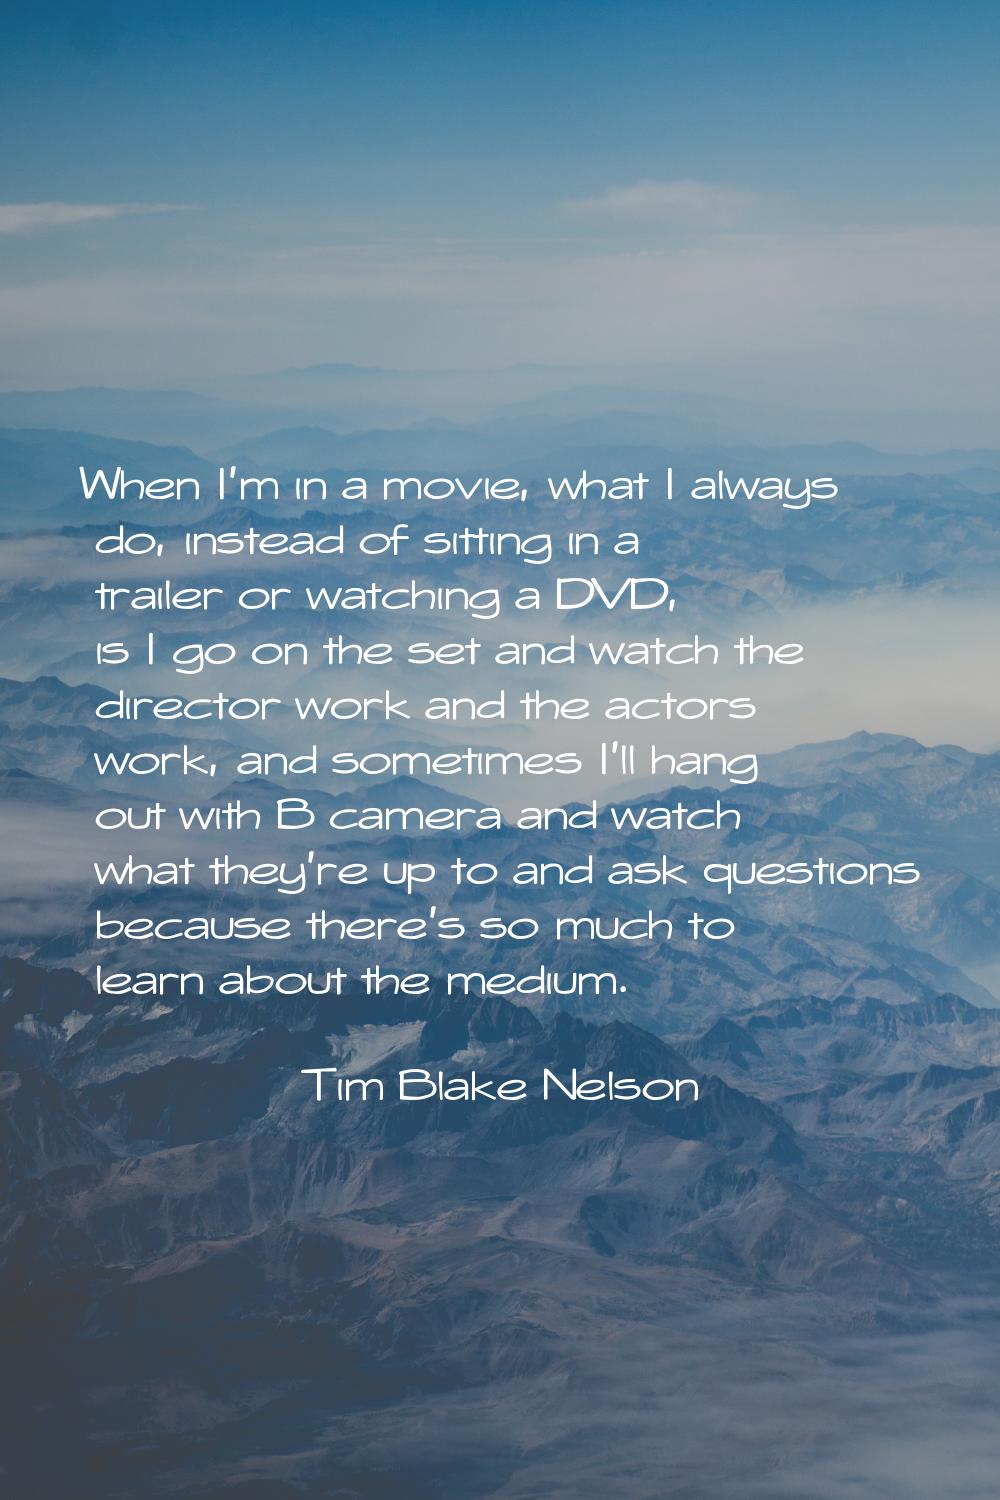 When I'm in a movie, what I always do, instead of sitting in a trailer or watching a DVD, is I go o